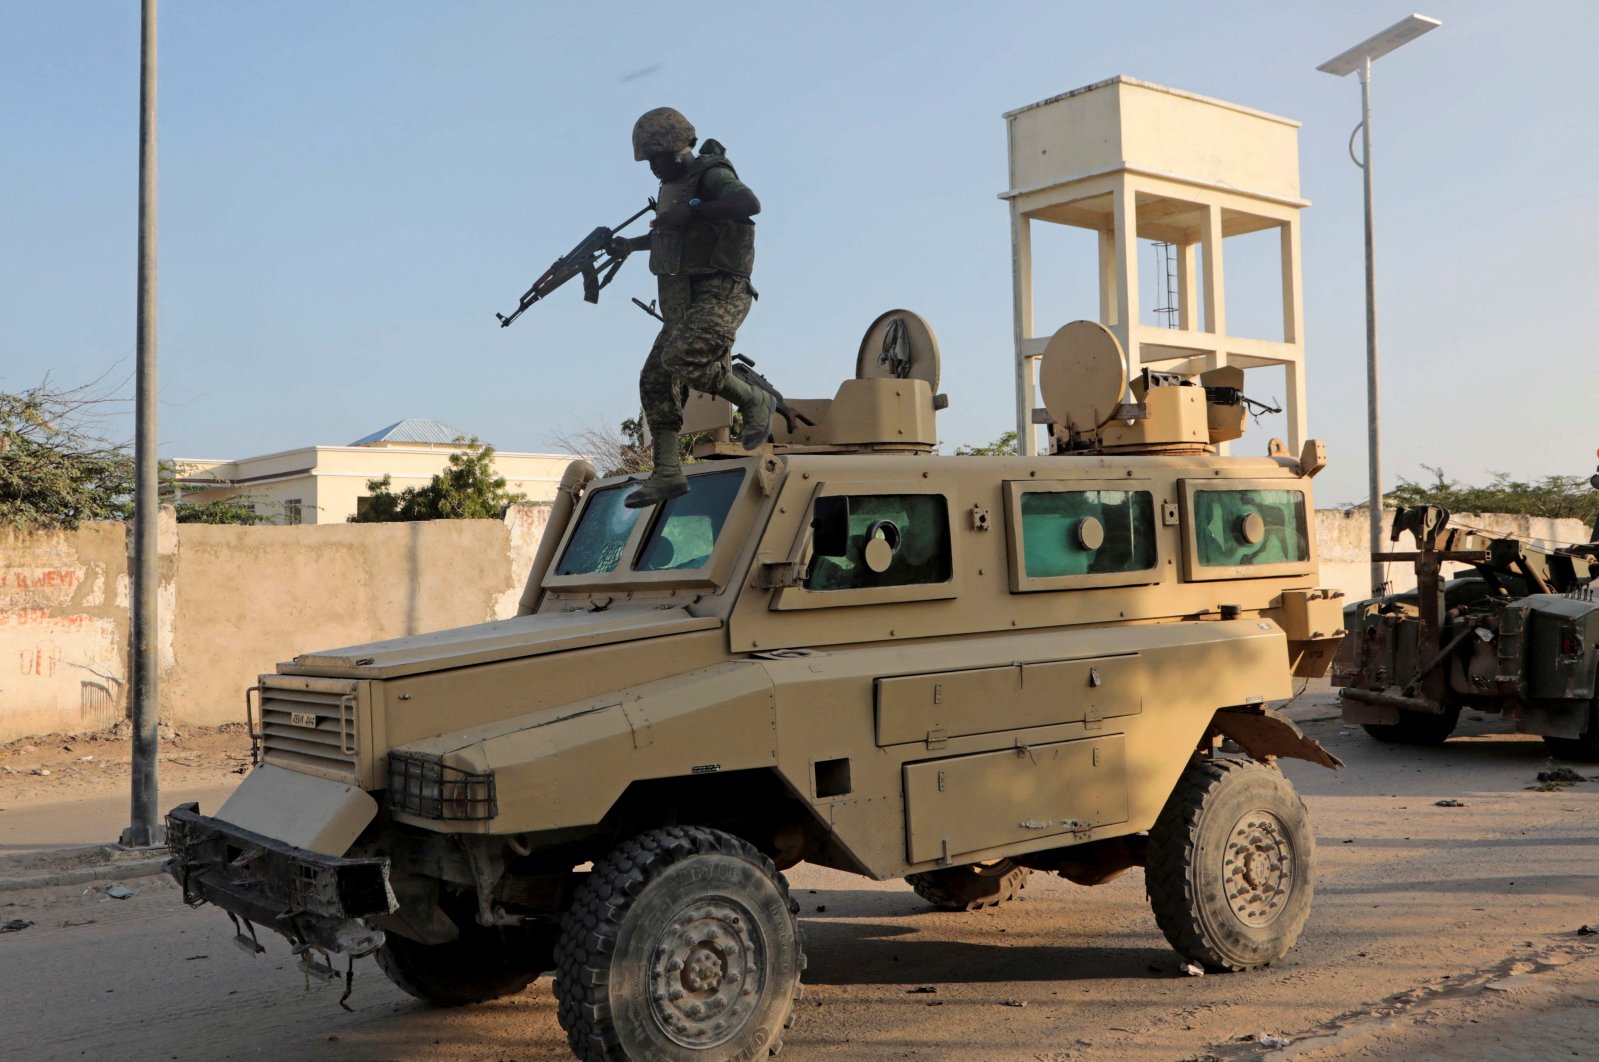 A soldier serving in the African Union Mission in Somalia (AMISOM) jumps off a military vehicle in Mogadishu, Somalia, Nov. 11, 2021. (Reuters Photo)